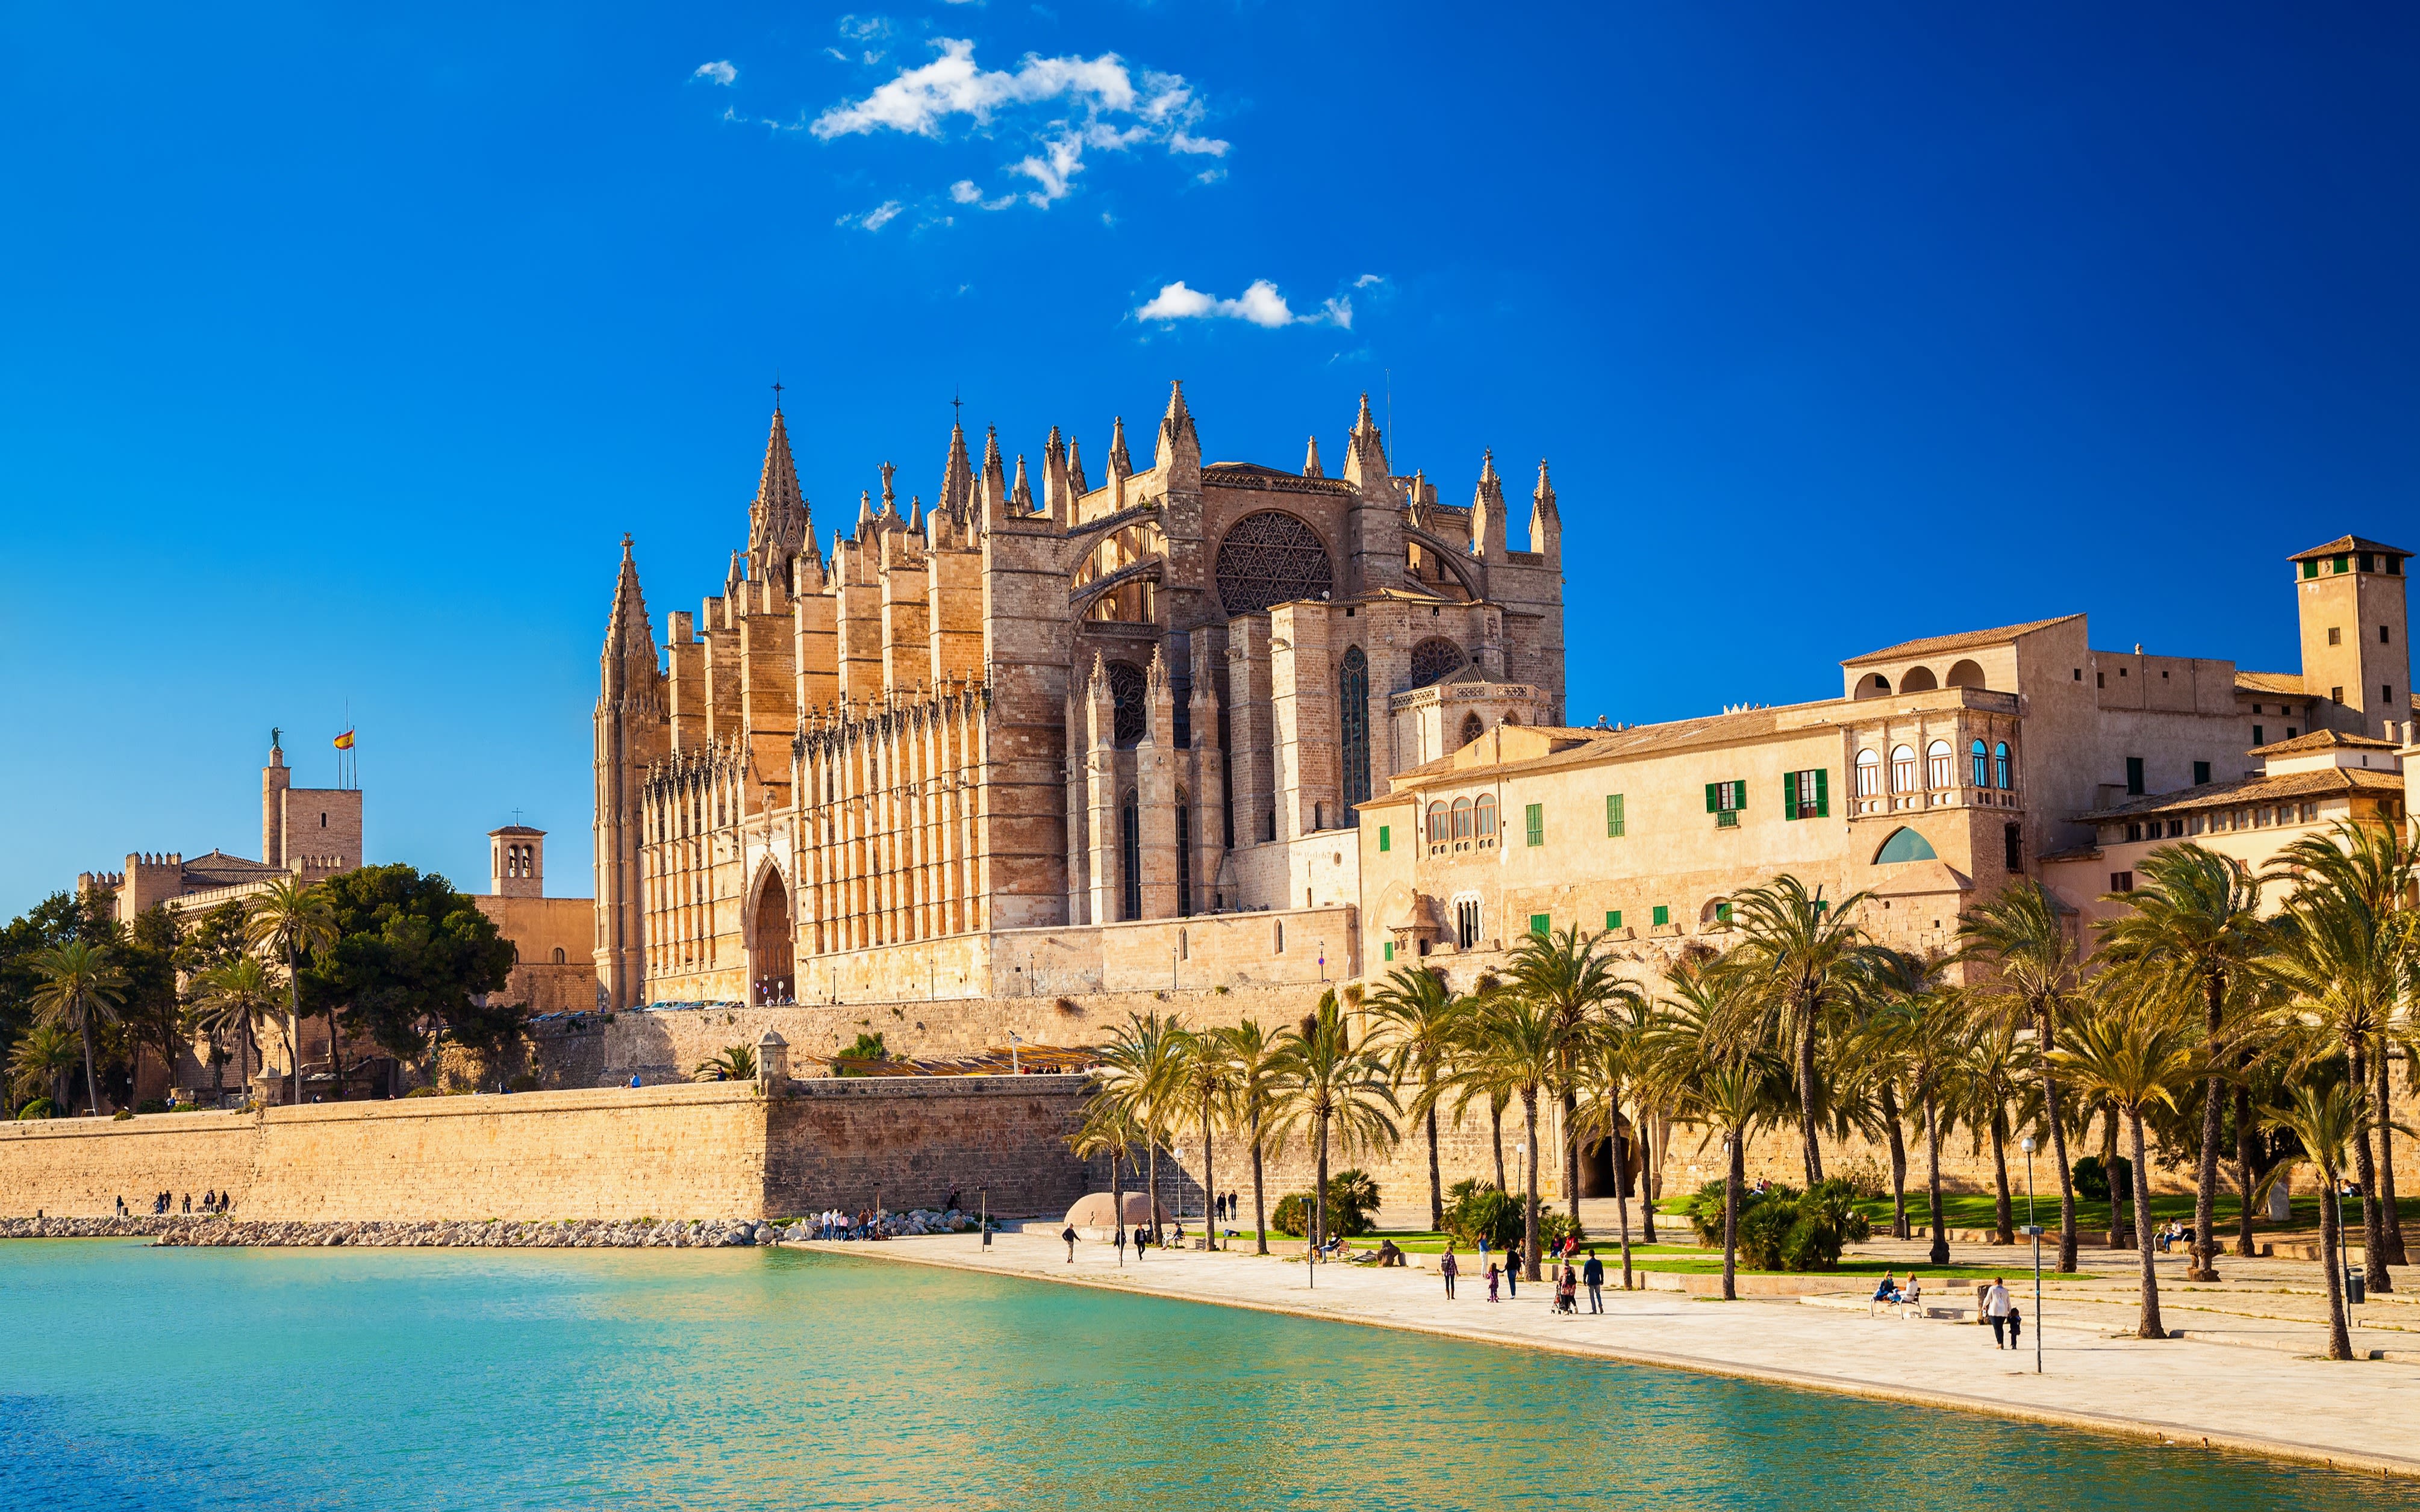 An image of the cathedral in Palma, Mallorca